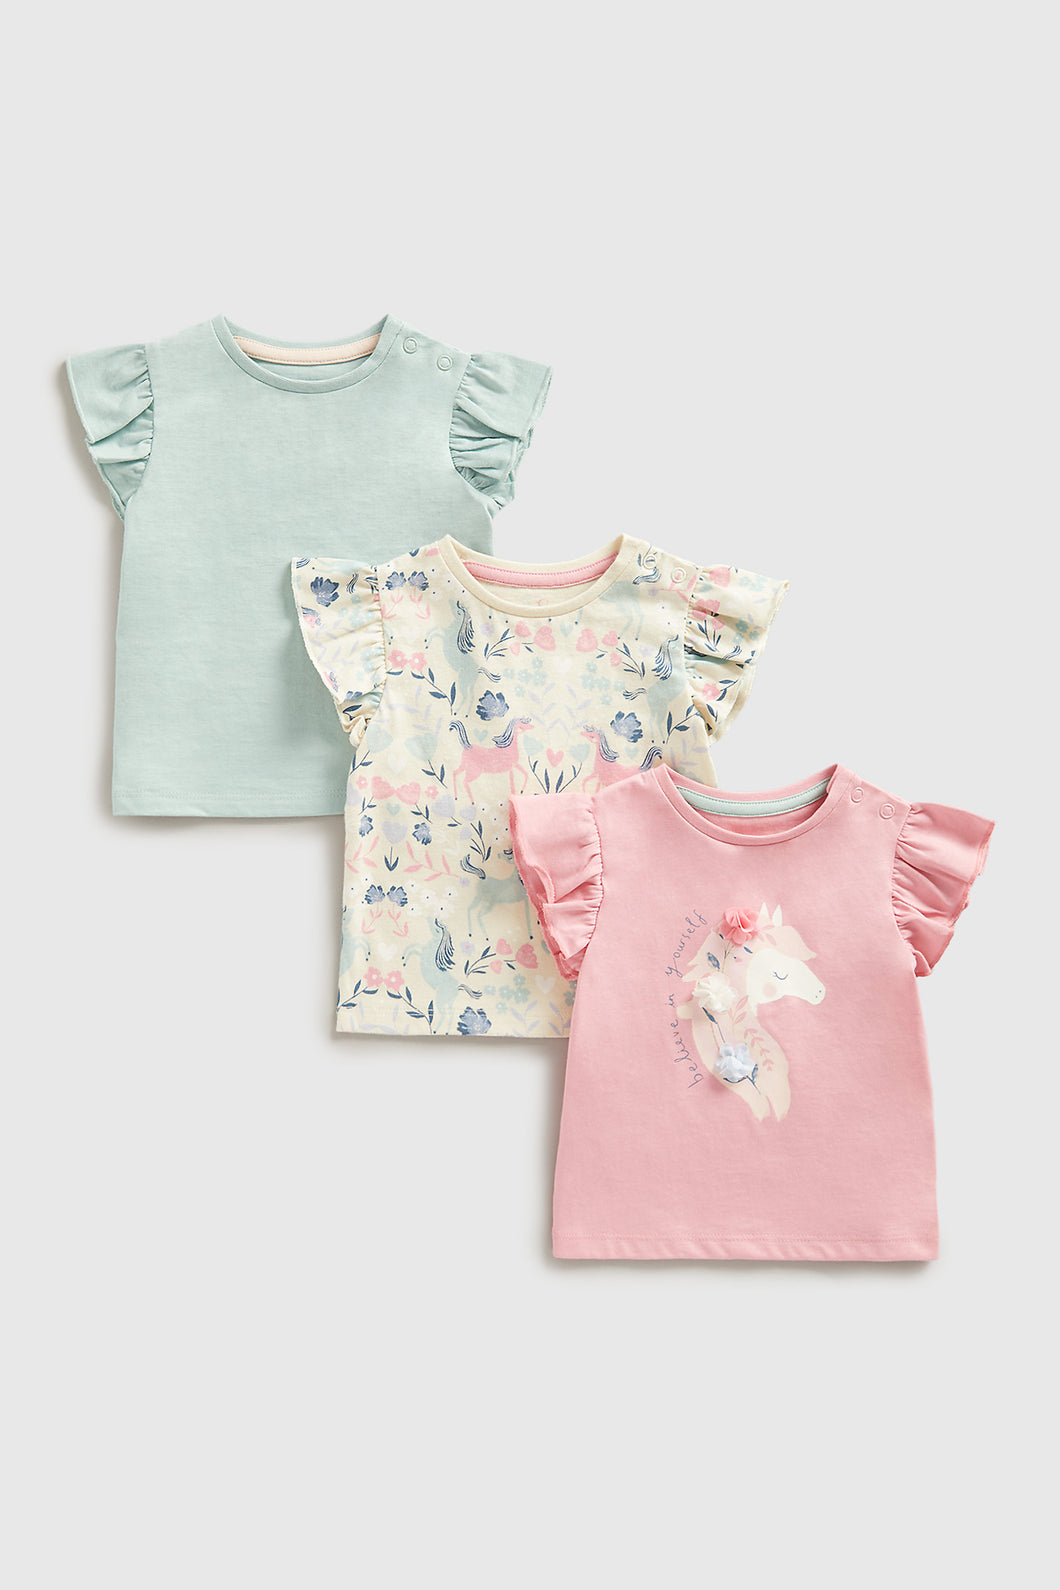 Mothercare Fairy-Tale T-Shirts - 3 Pack